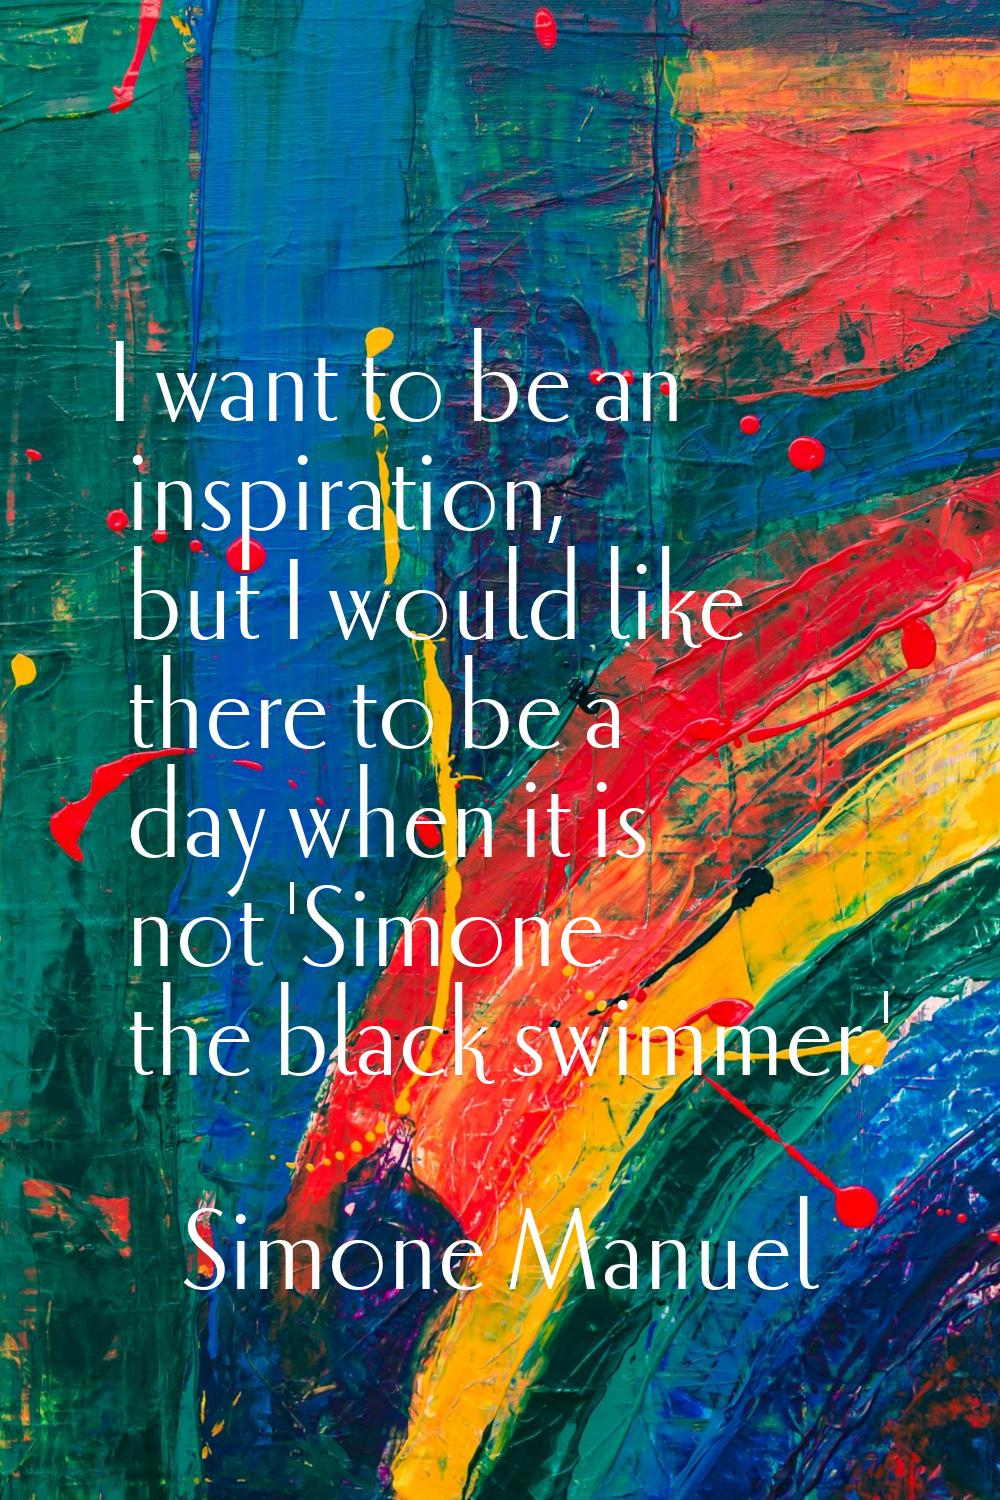 I want to be an inspiration, but I would like there to be a day when it is not 'Simone the black sw